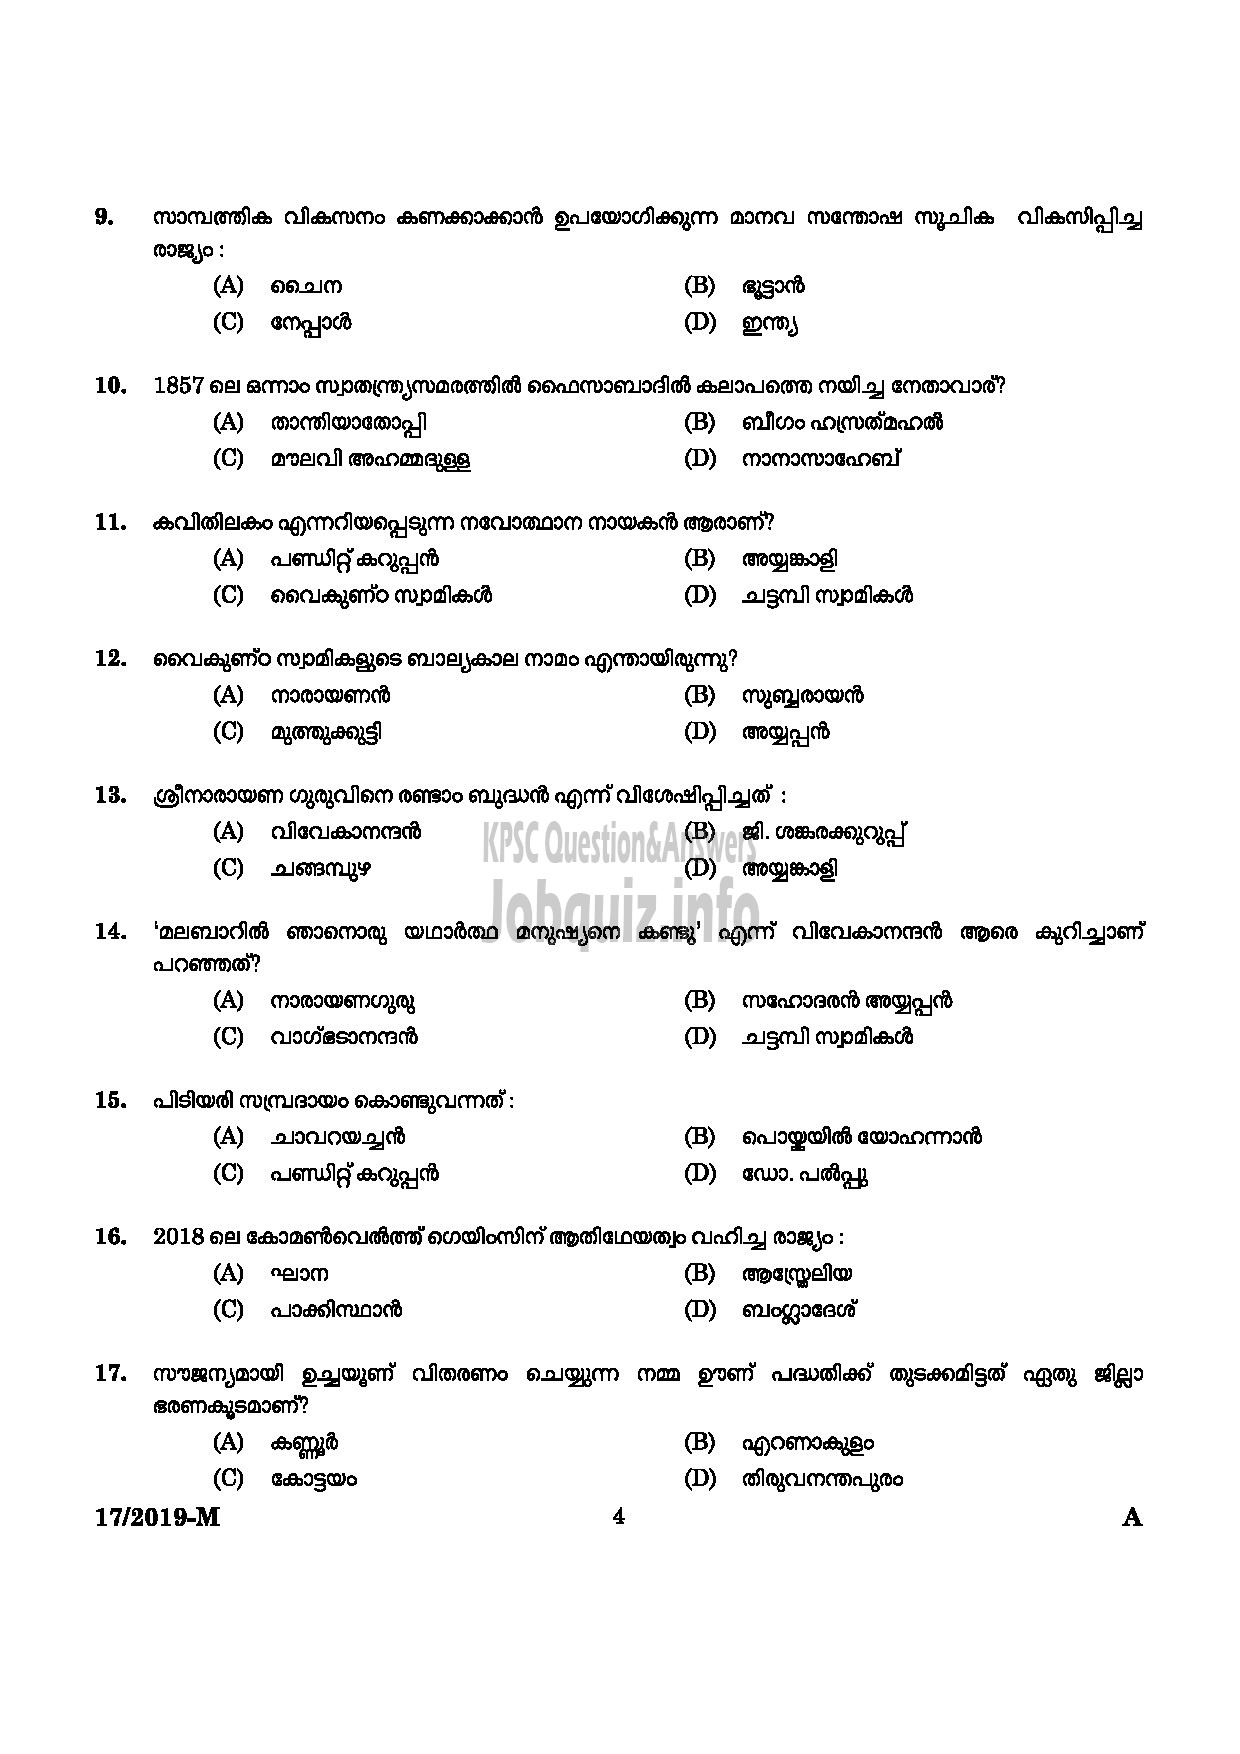 Kerala PSC Question Paper - WORKSHOP ATTENDER MECHANIC MOTOR VEHICLE SR FOR STONLY INDUSTRIAL TRAINING DEPARTMENT MALAYALAM-2